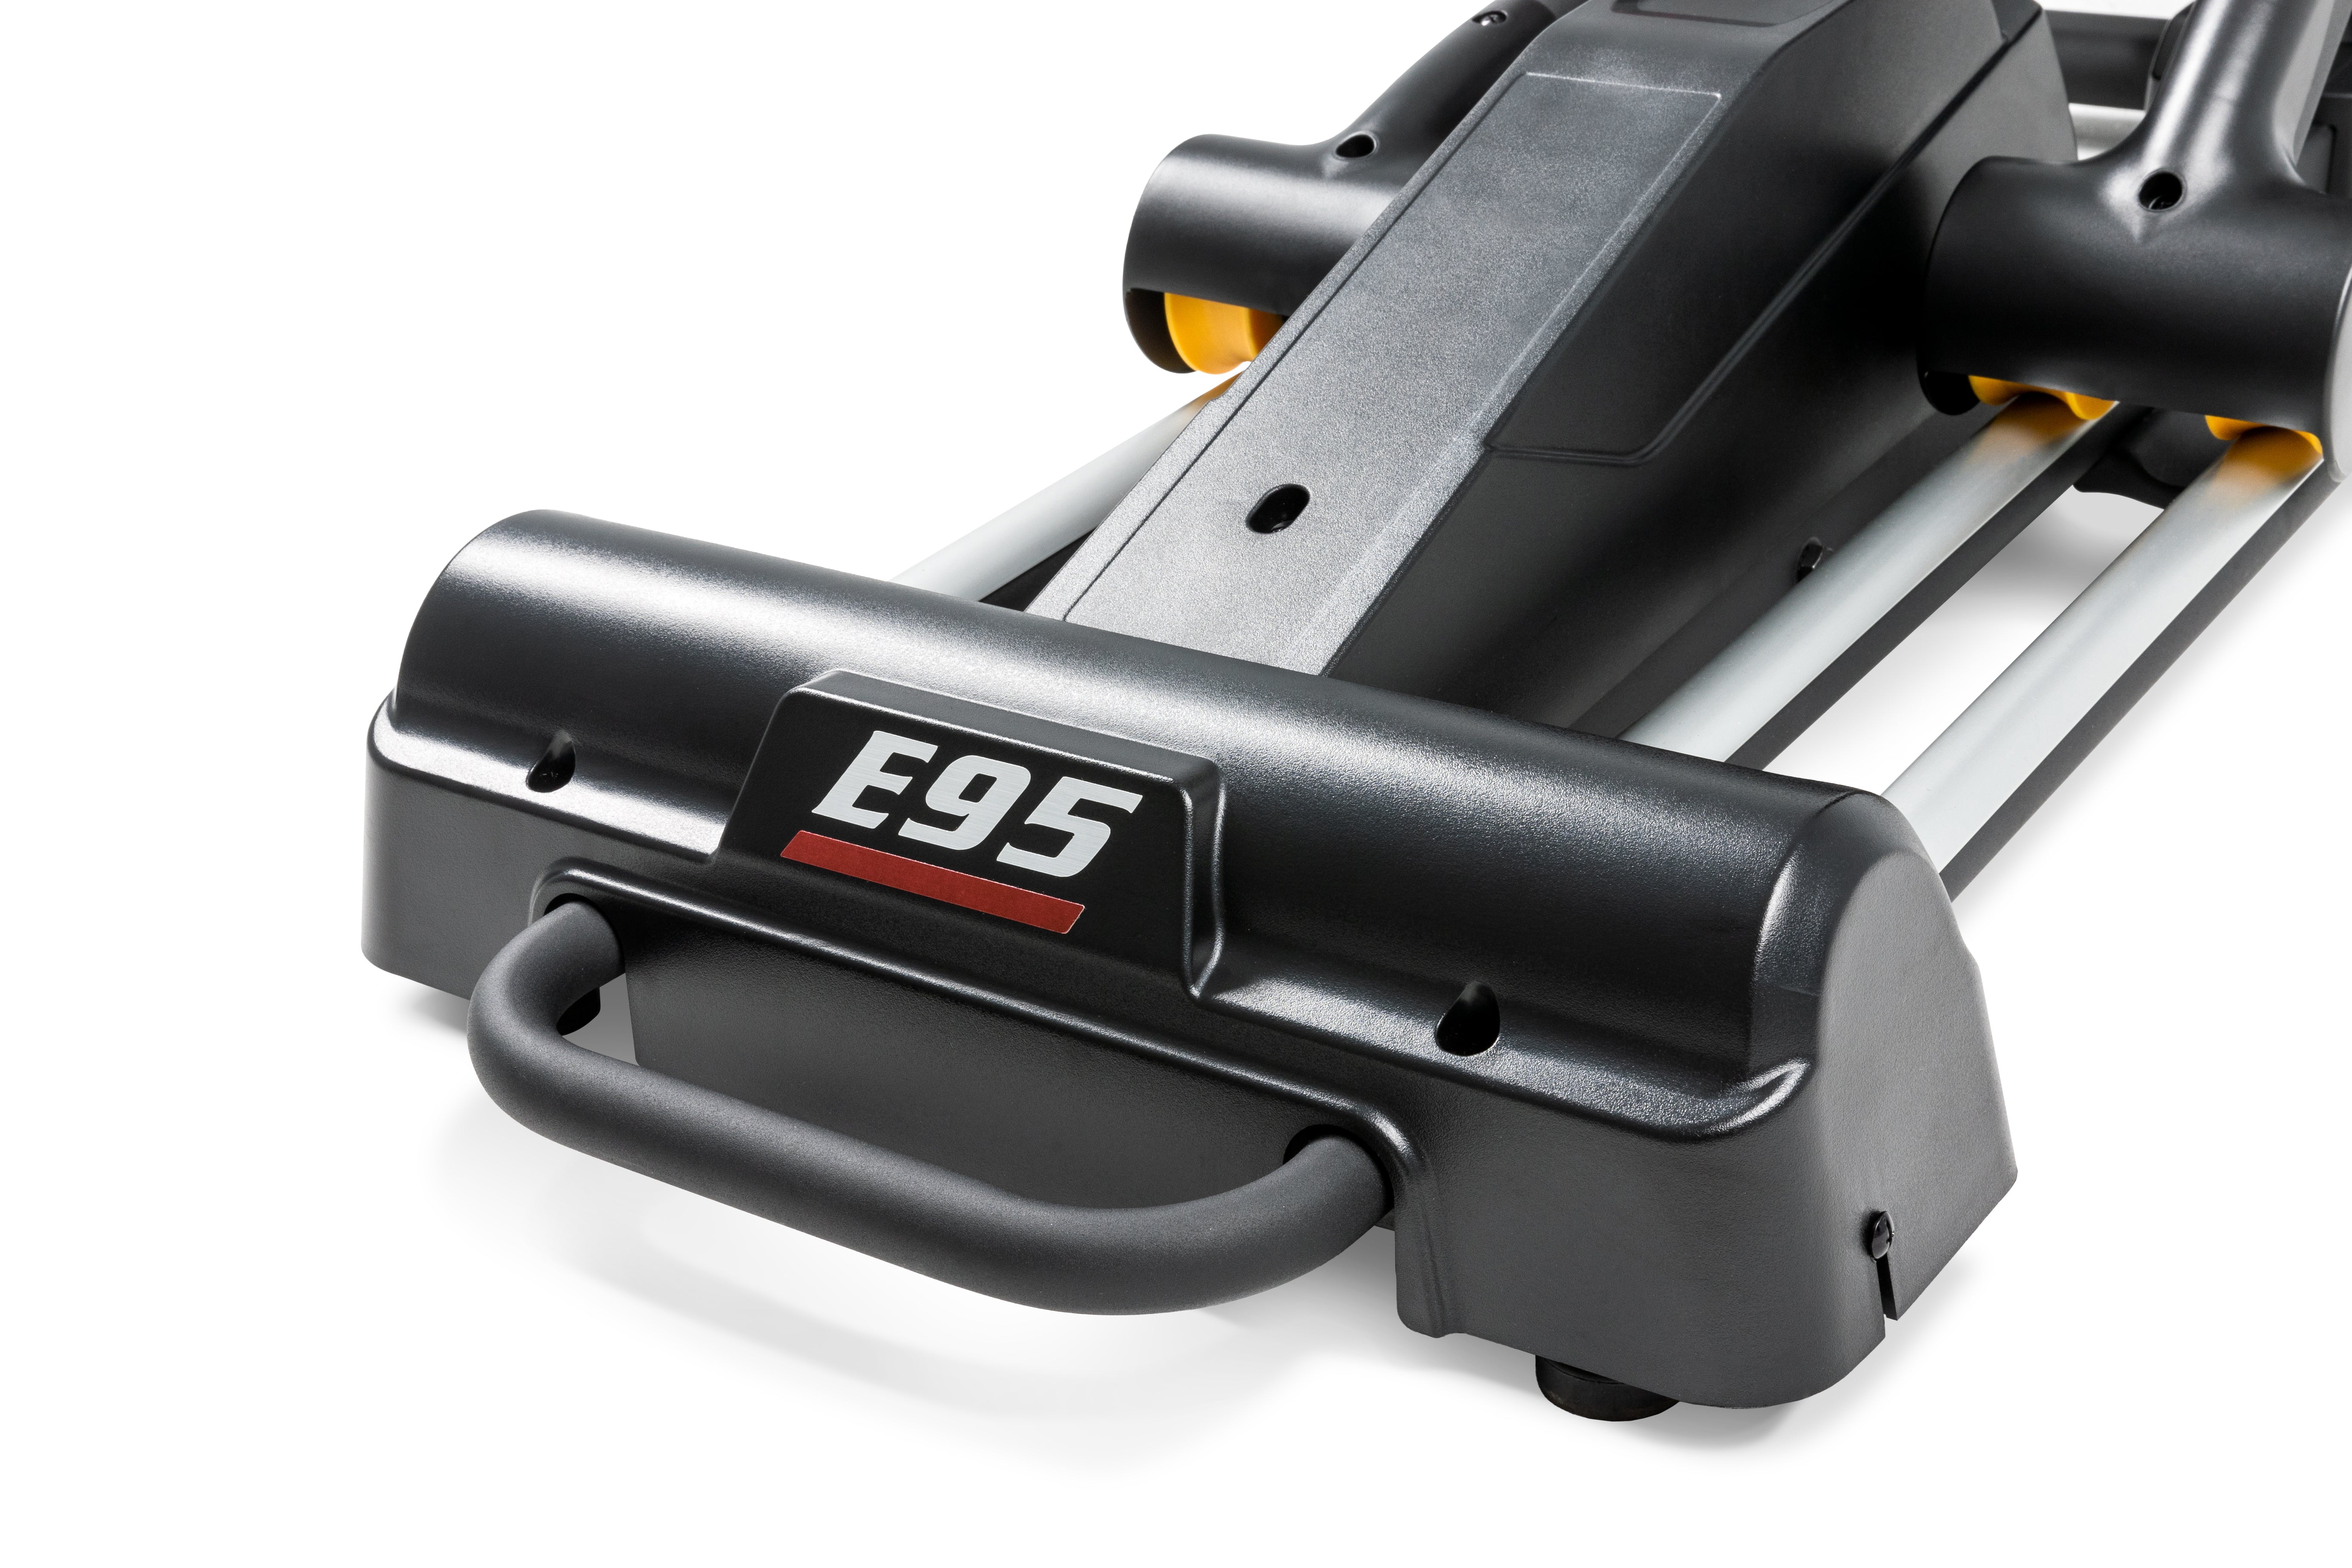 Close-up view of the base of the Sole E95 elliptical machine, highlighting the 'E95' branding on a metallic grey finish, yellow wheels, and sturdy handle.